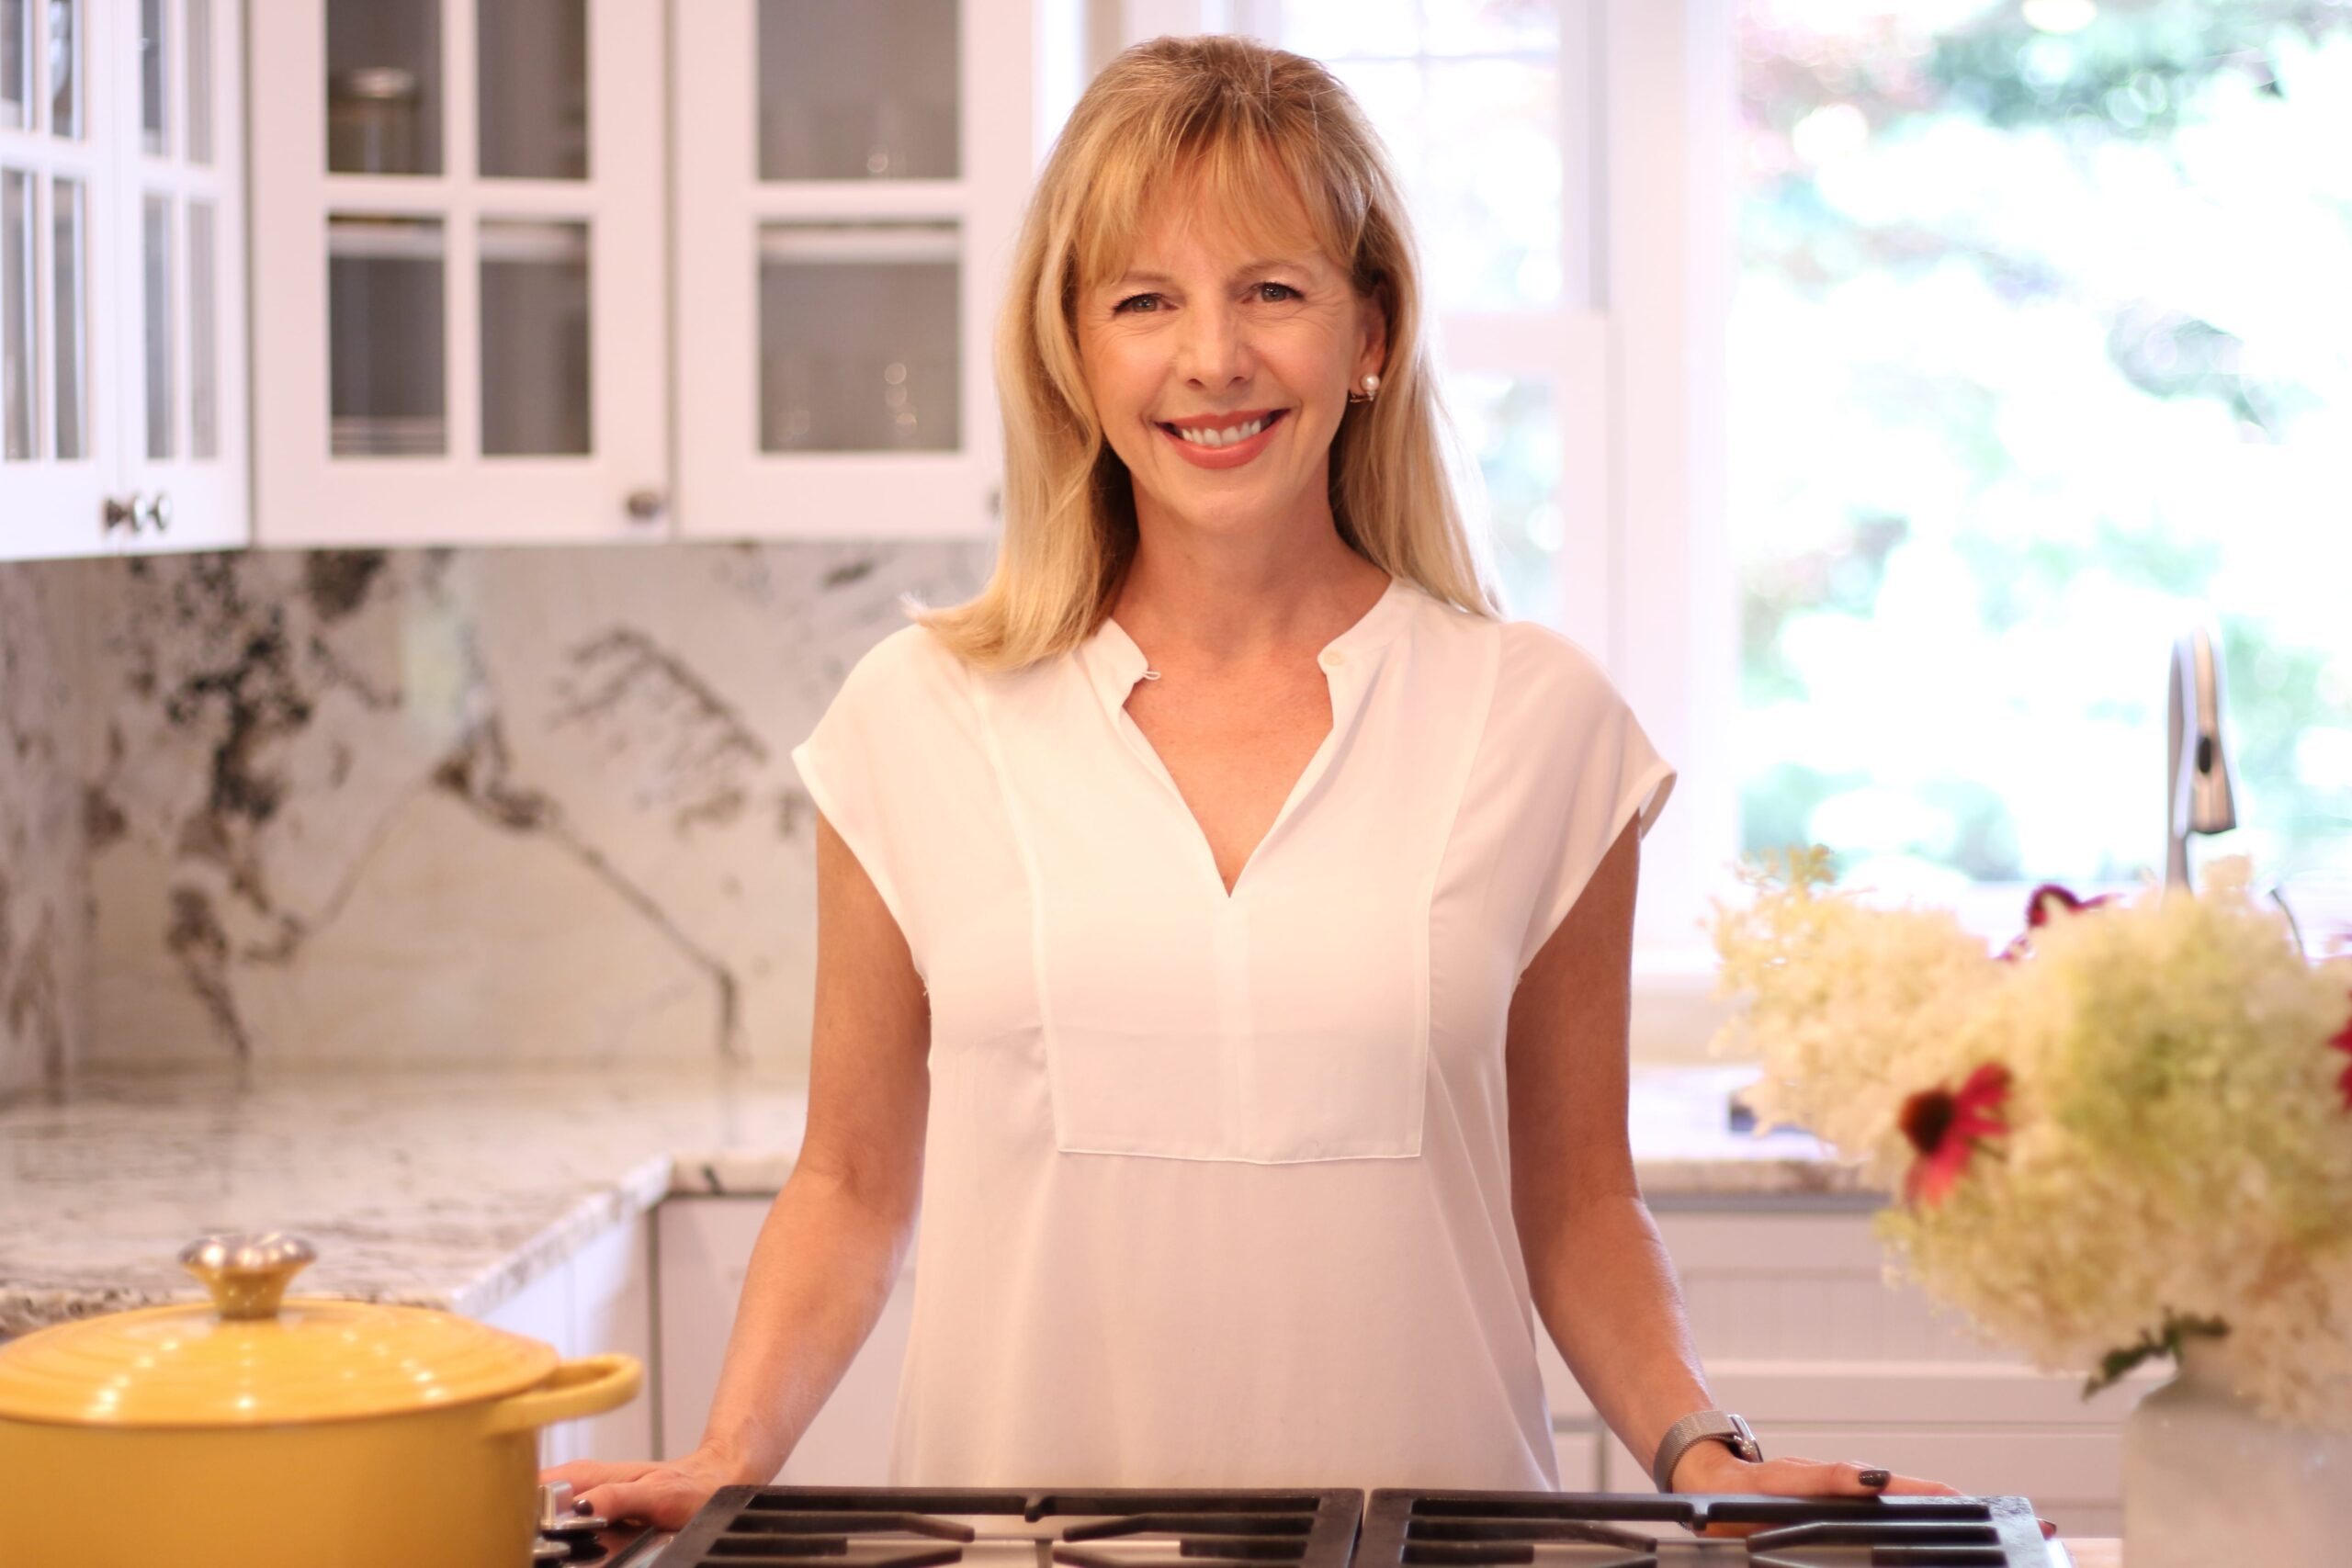 Lindsey smiling in the kitchen next to a yellow pot, wearing a white top a